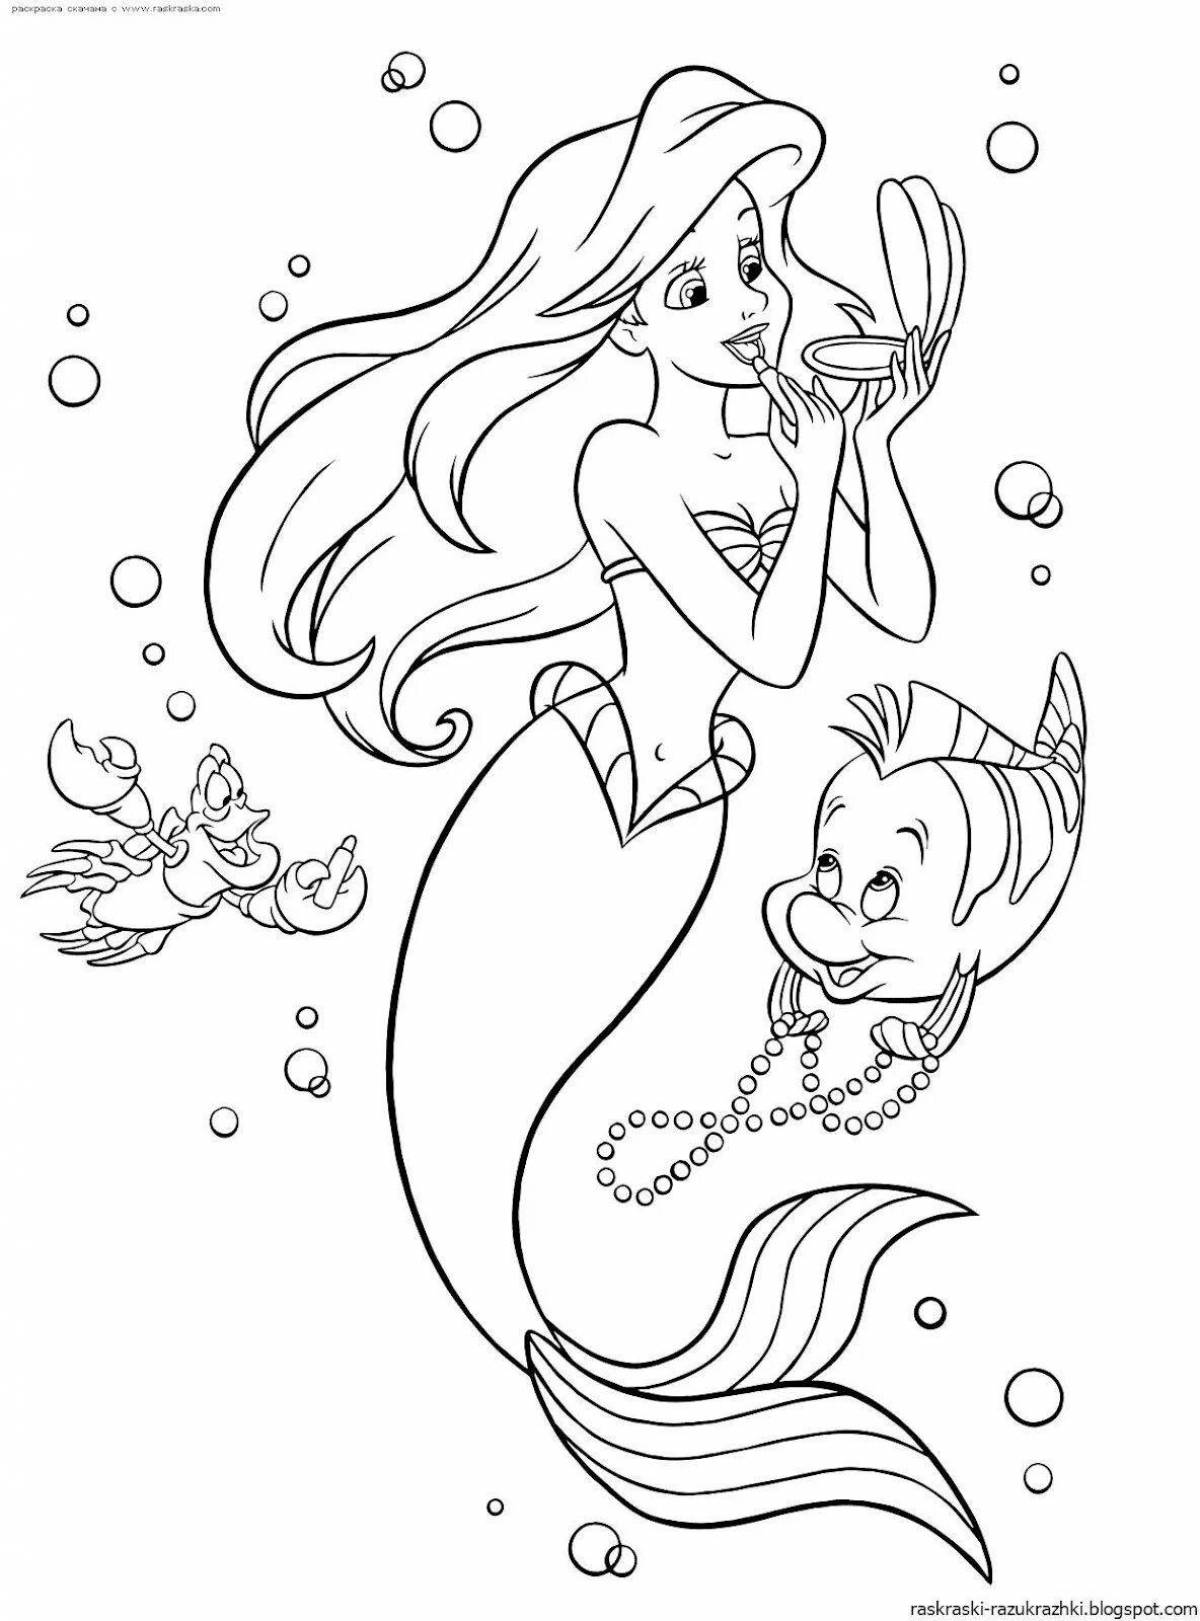 Whimsical little mermaid coloring book for girls